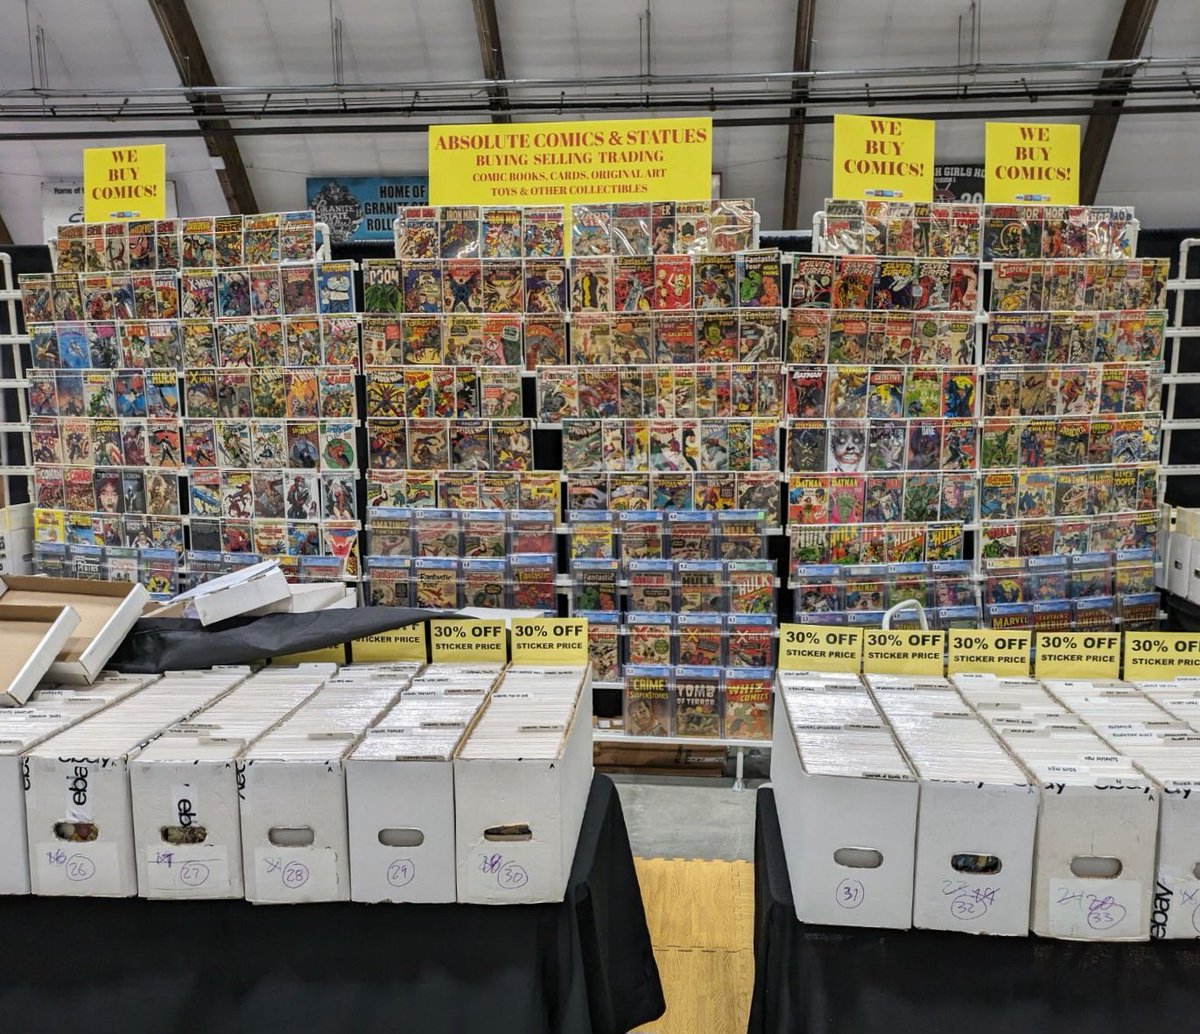 We're almost ready for you at the Little Giant Old School Comic Show over in booths D3/D4. 

#comics #comicbooks #cgccomics #cgc #spiderman #xmen #fantasticfour #hulk #silversurfer #batman #superman #spawn #littlegiantcomics #oldschoolcomicshow #comicshow #comicconvention